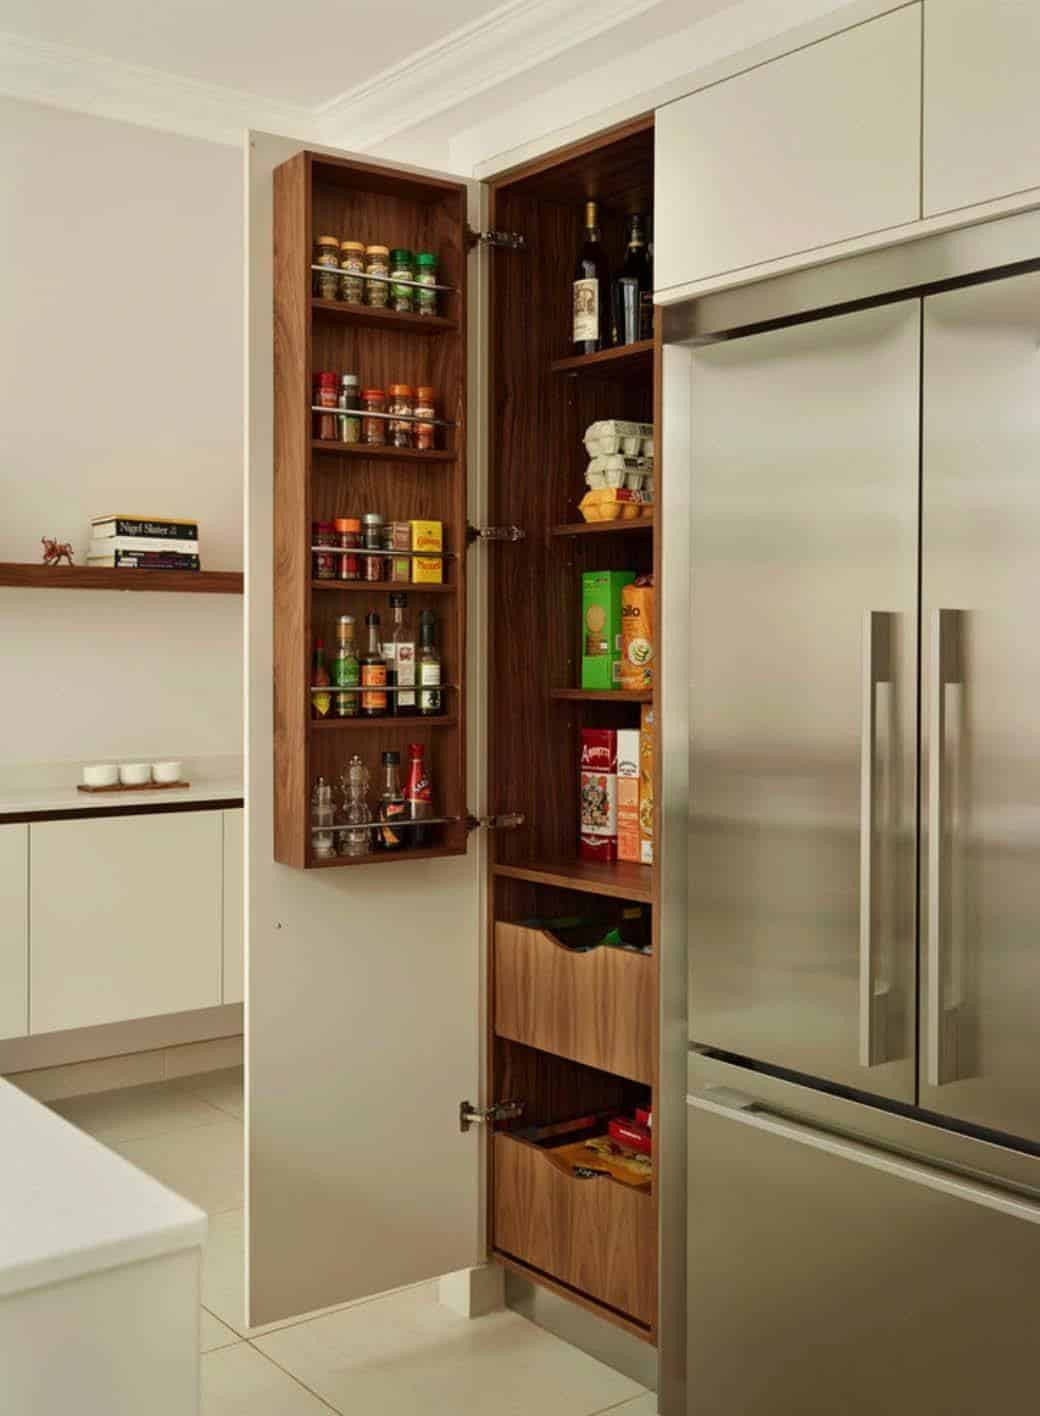 Pantry Ideas In Small Kitchen
 35 Clever ideas to help organize your kitchen pantry